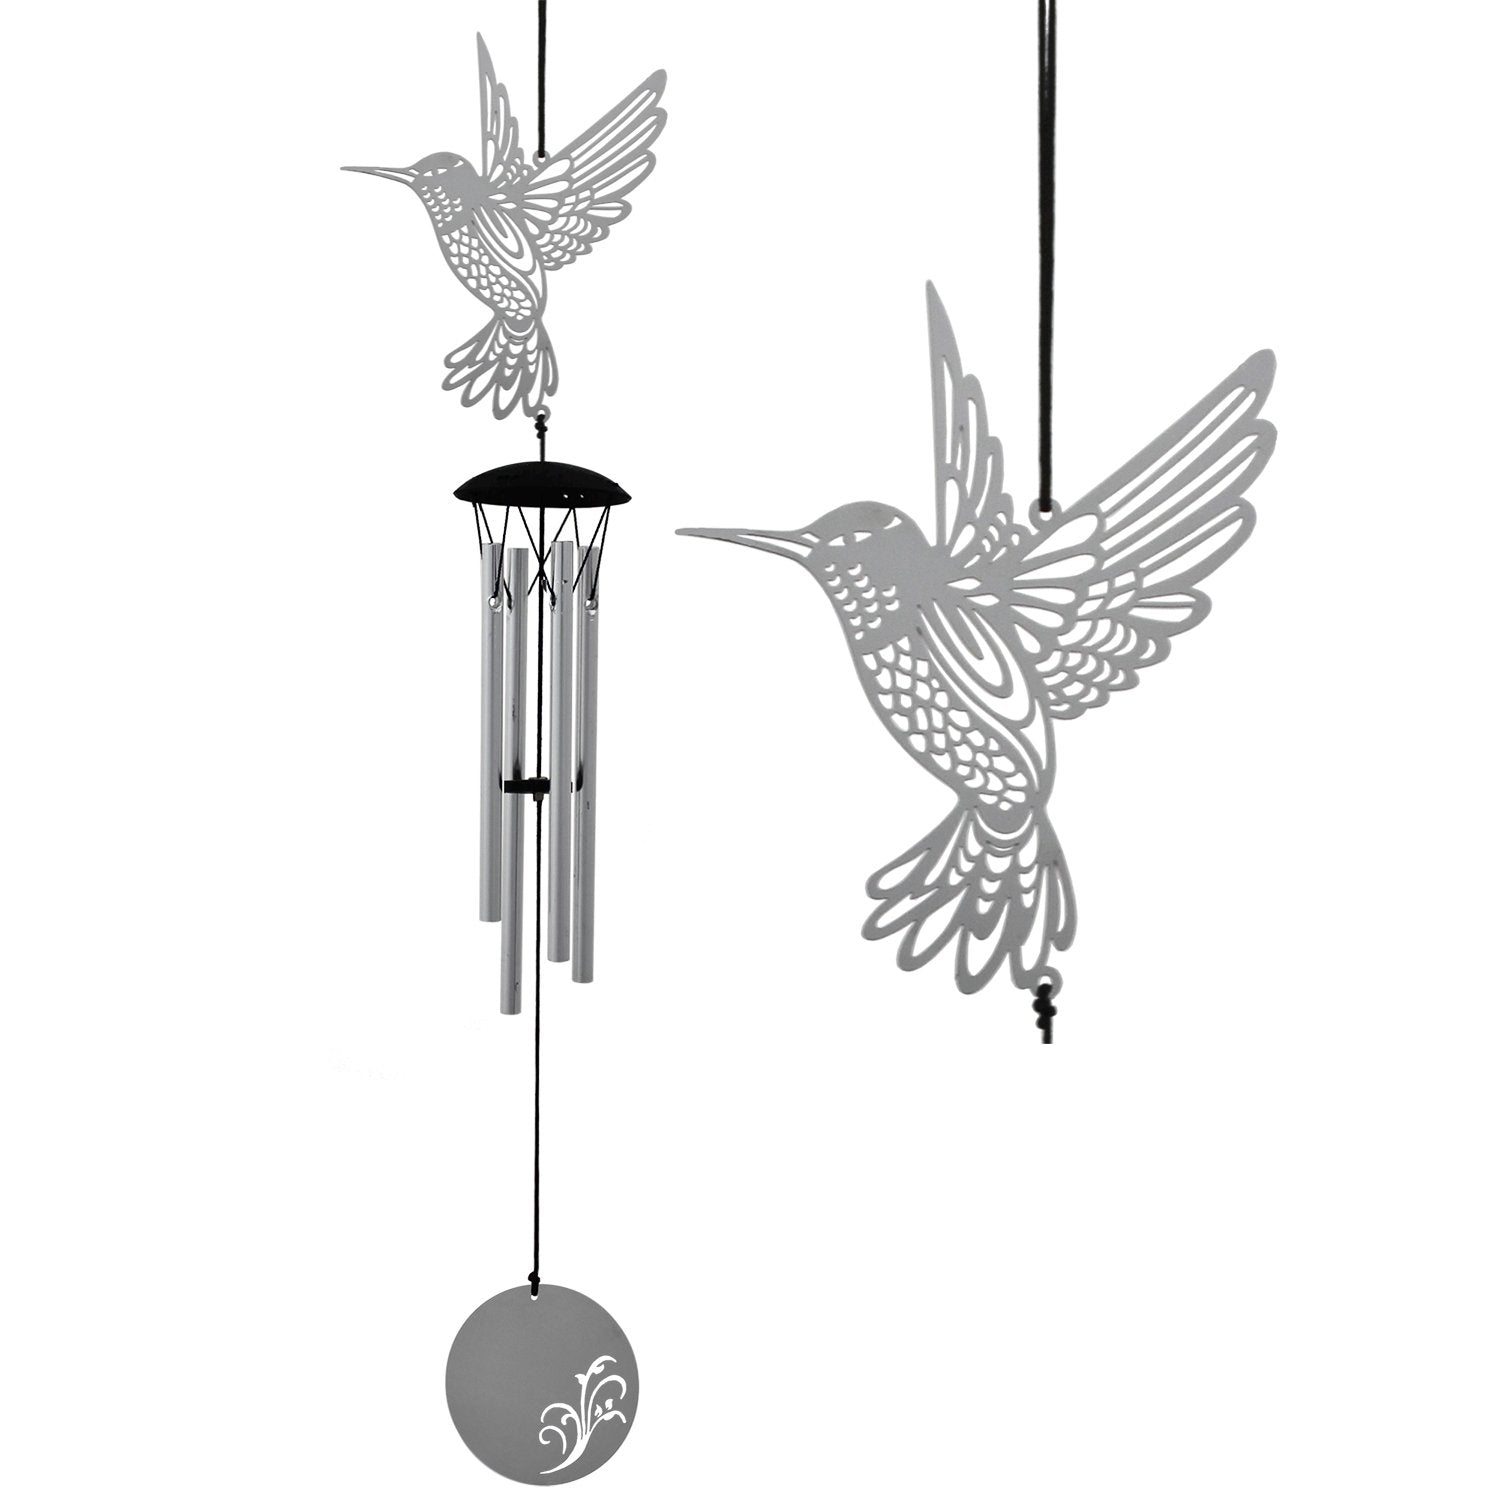 Woodstock Wind Chimes Signature Collection, Woodstock Flourish Chime, 18'' Hummingbird Silver Wind Chime FLHU - image 3 of 6